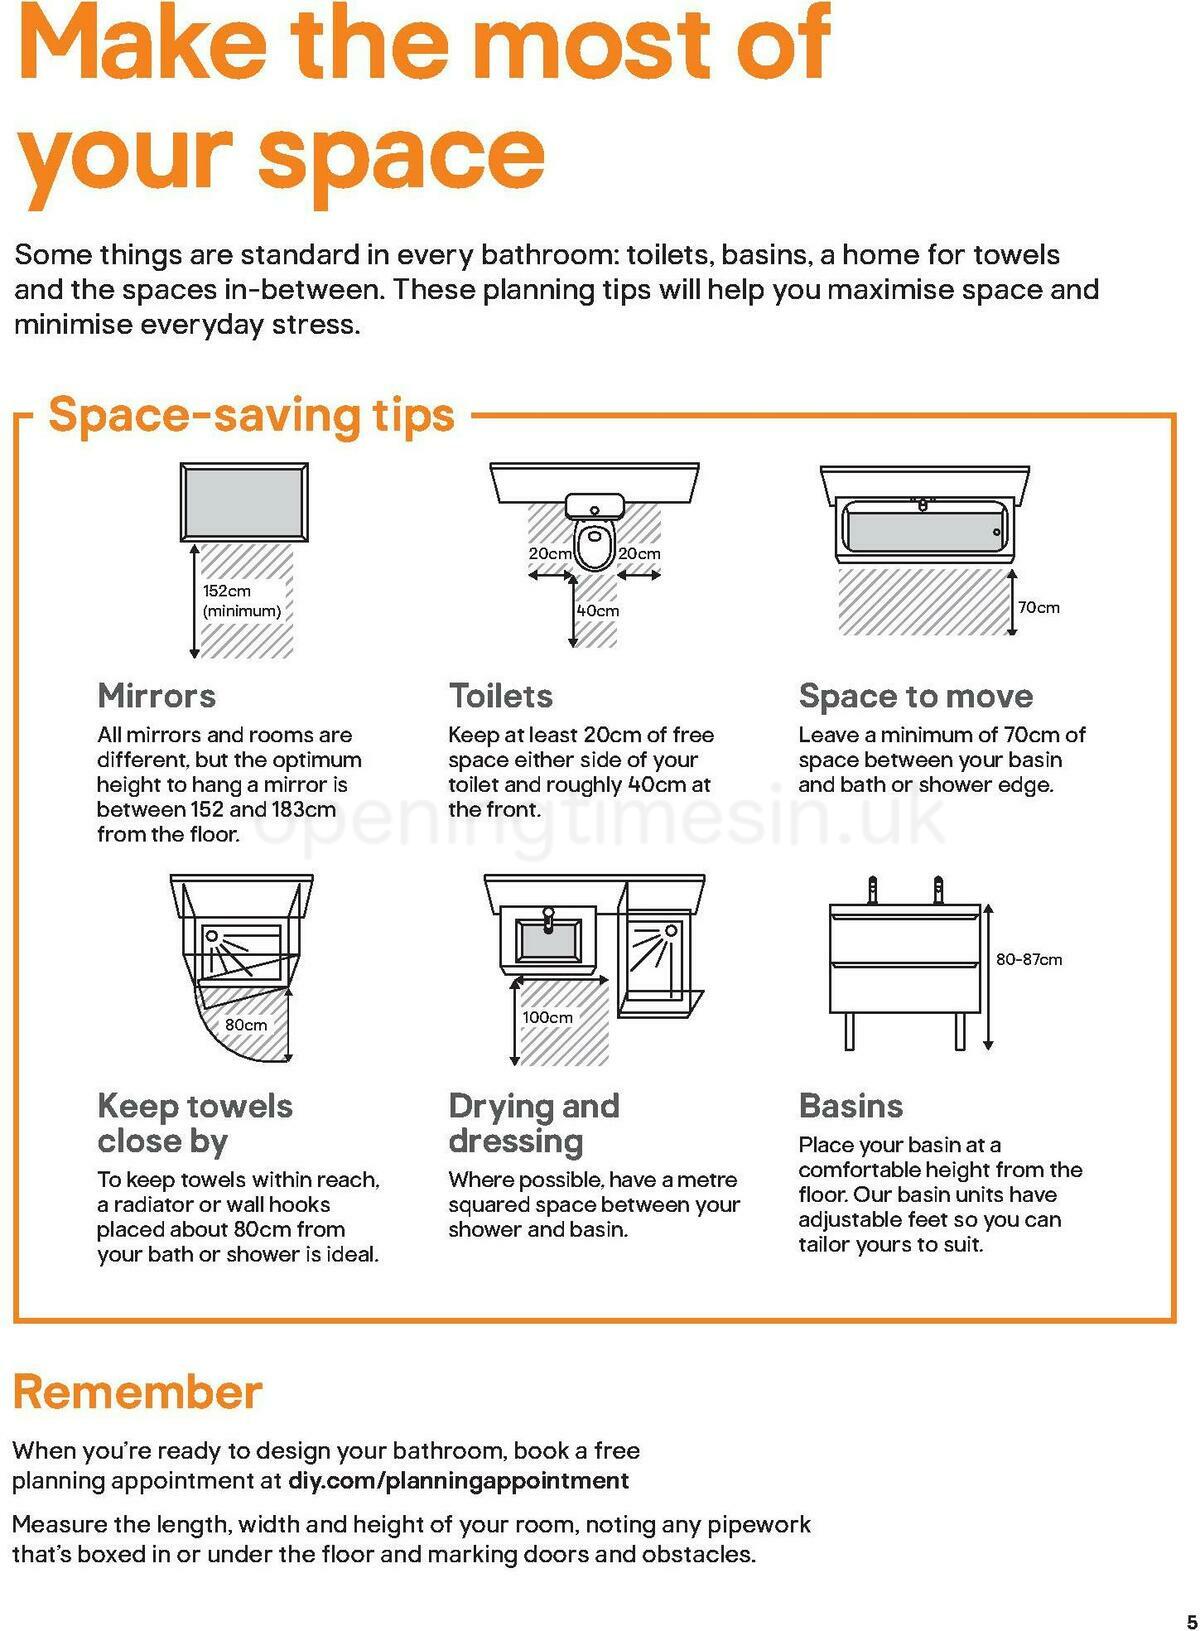 B&Q Bathroom Collections Offers from 1 May